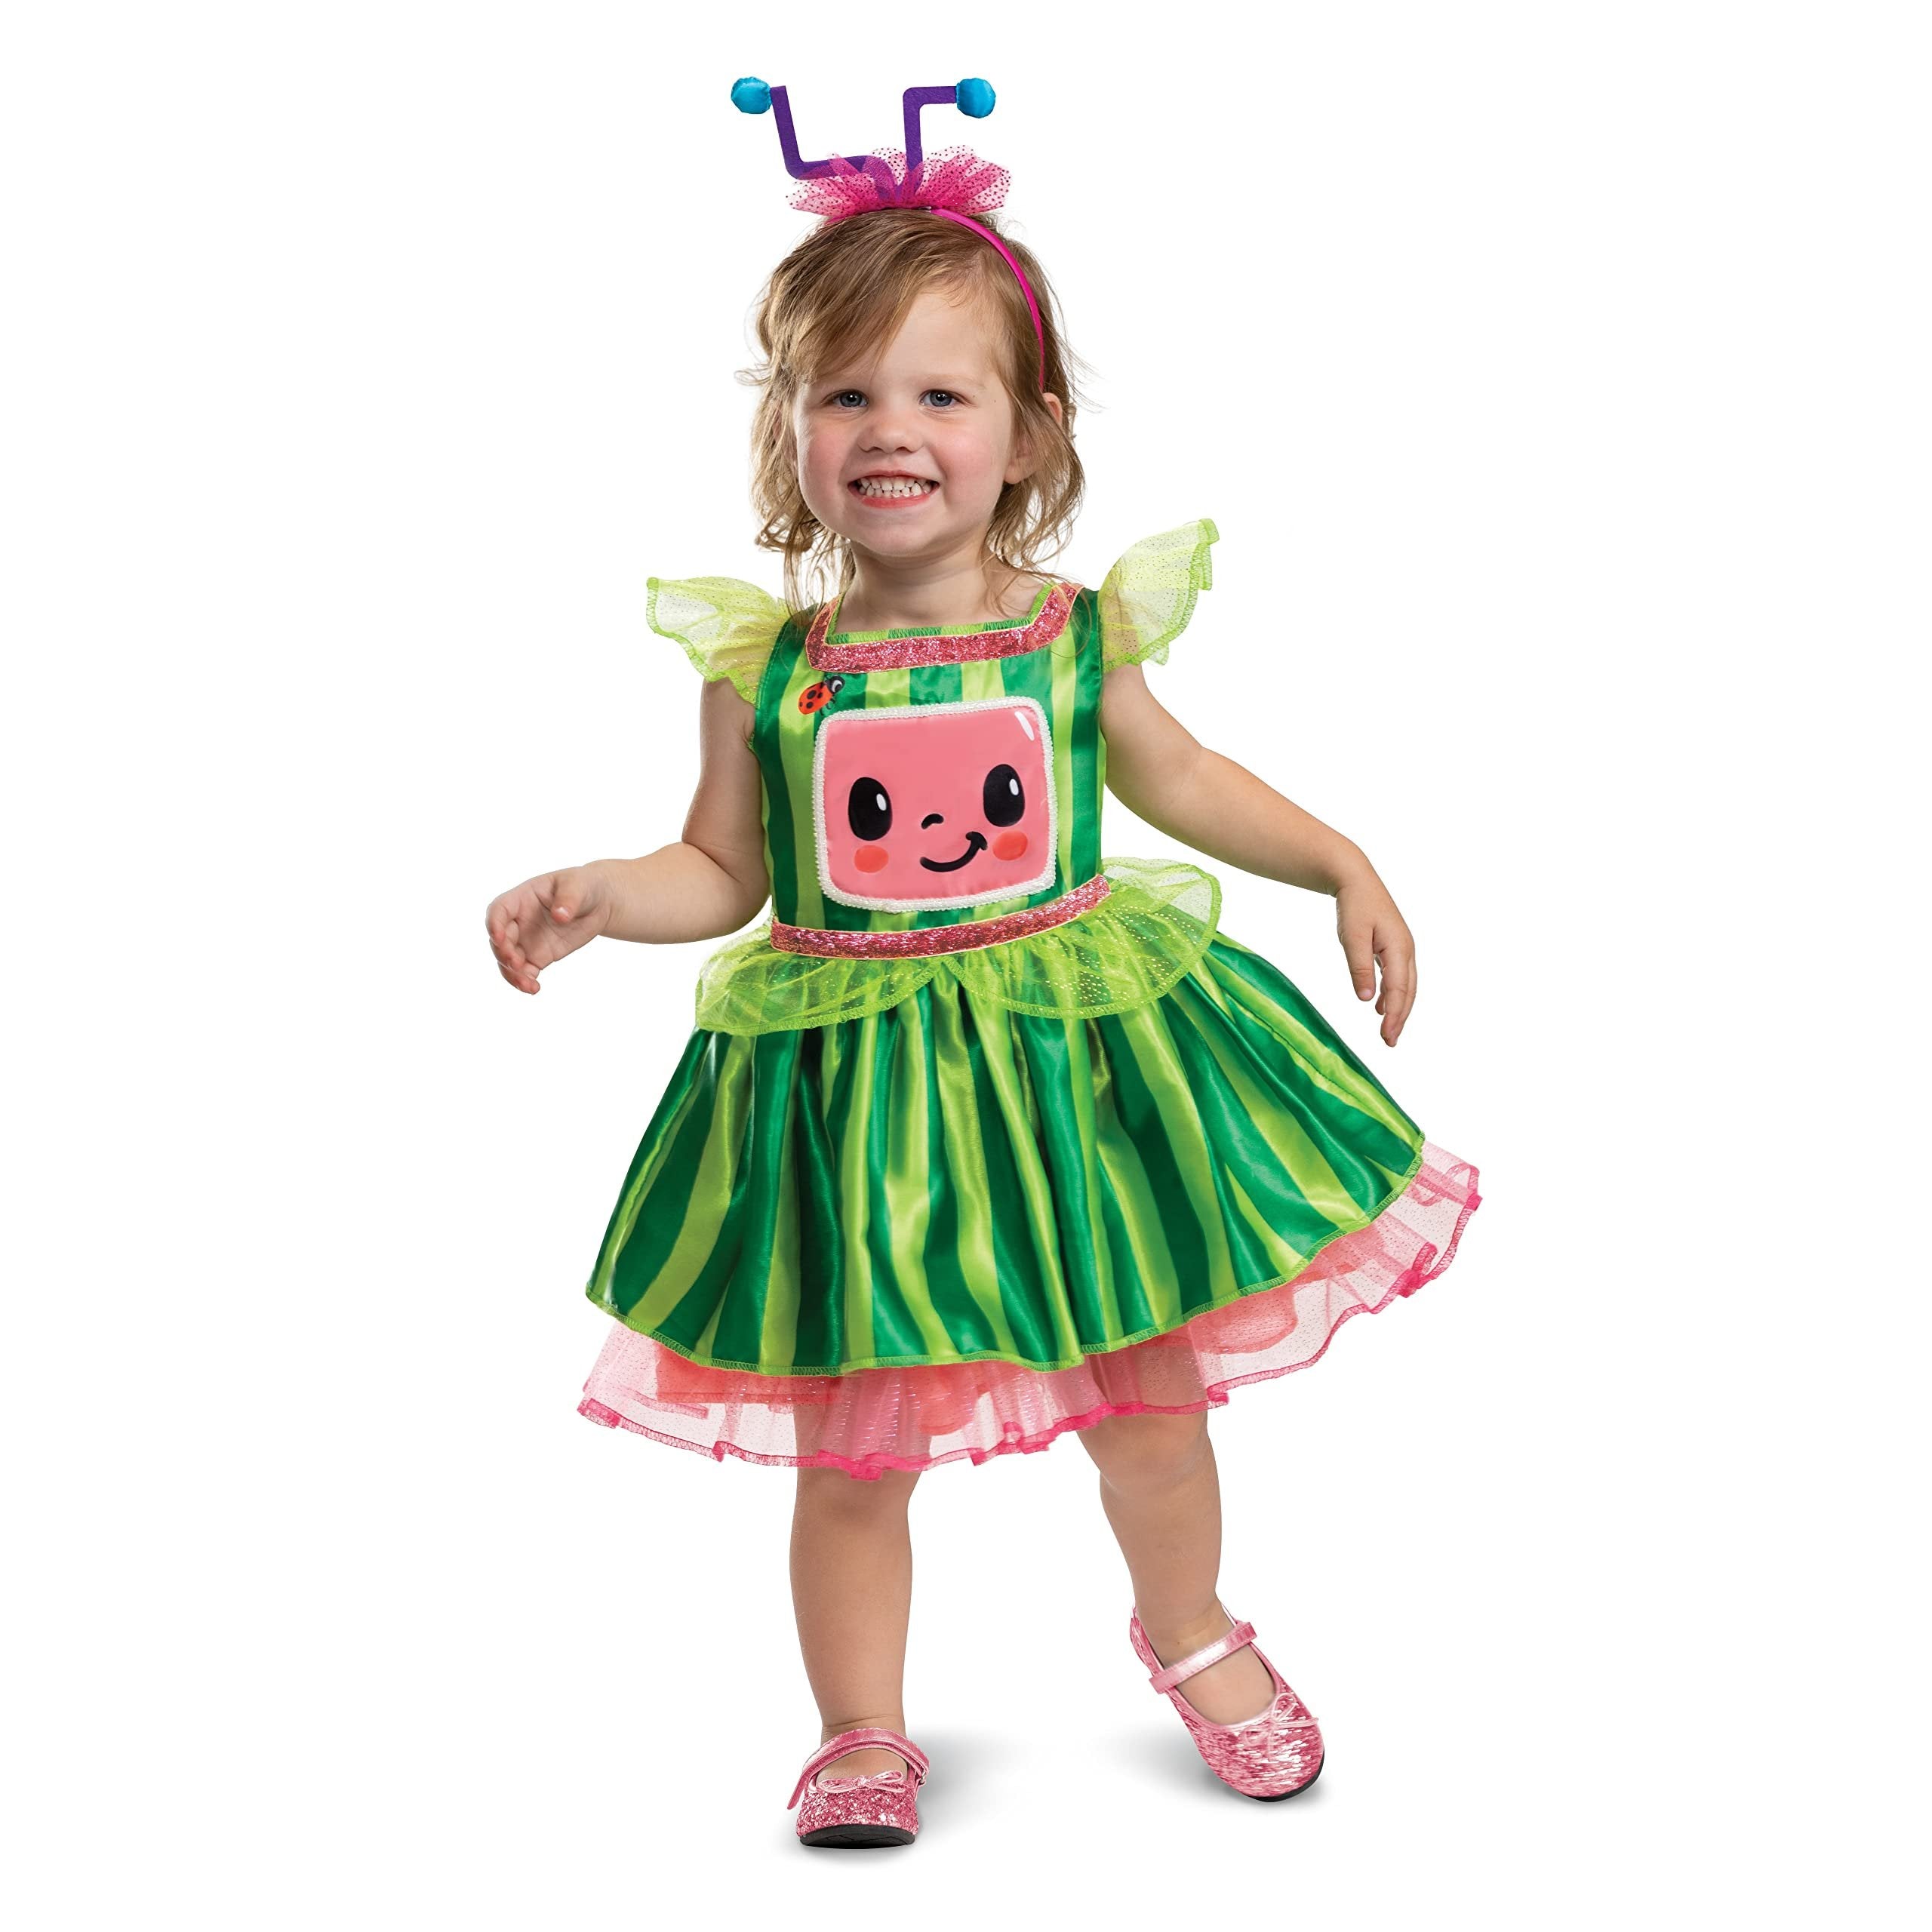 Disguise Cocomelon Toddler Dress, Official Cocomelon Costume Tutu Outfit for Kids, Toddler Size (2T)